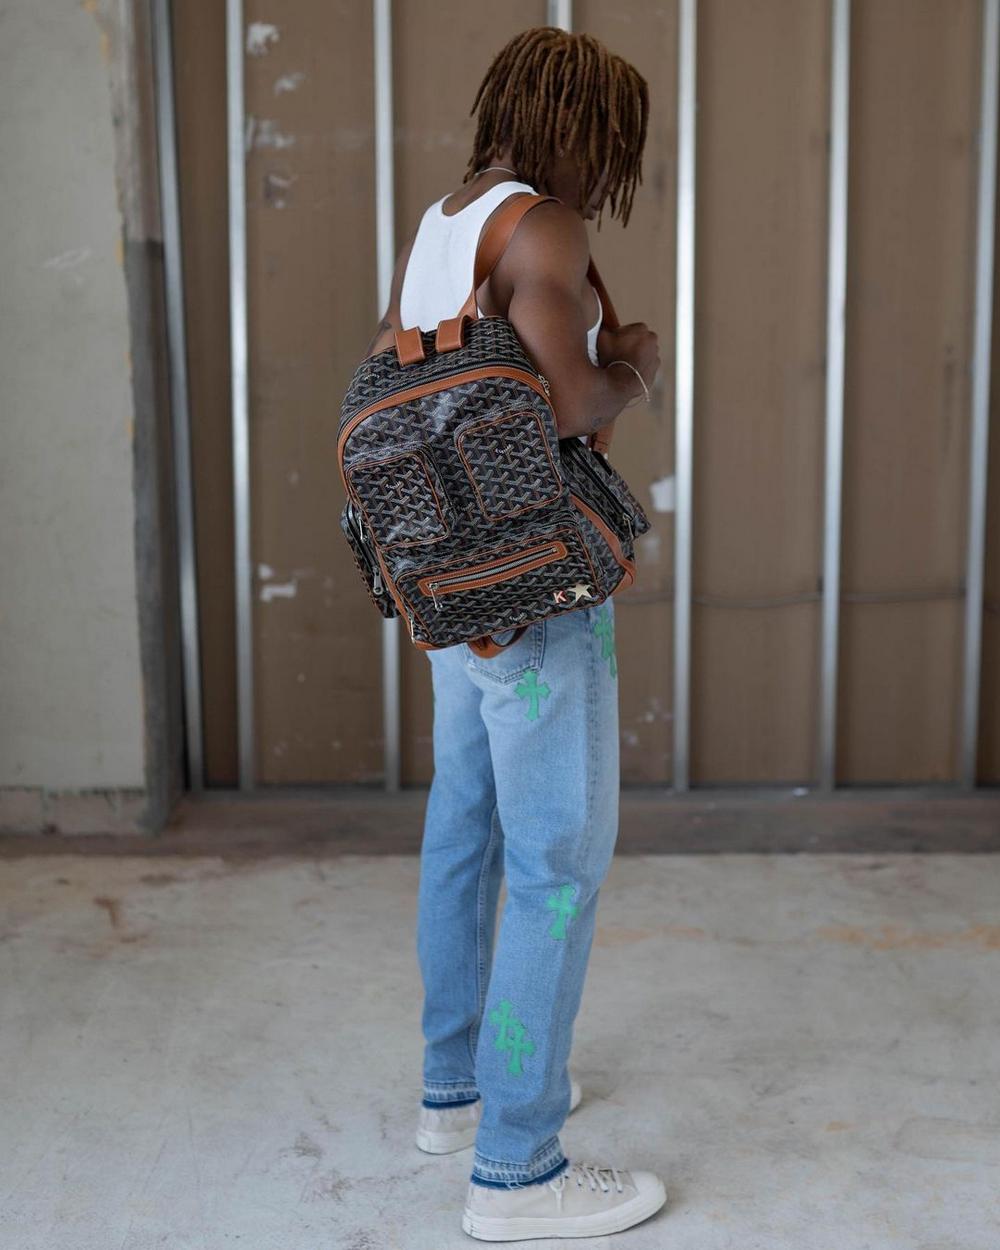 kanye west louis vuitton backpack